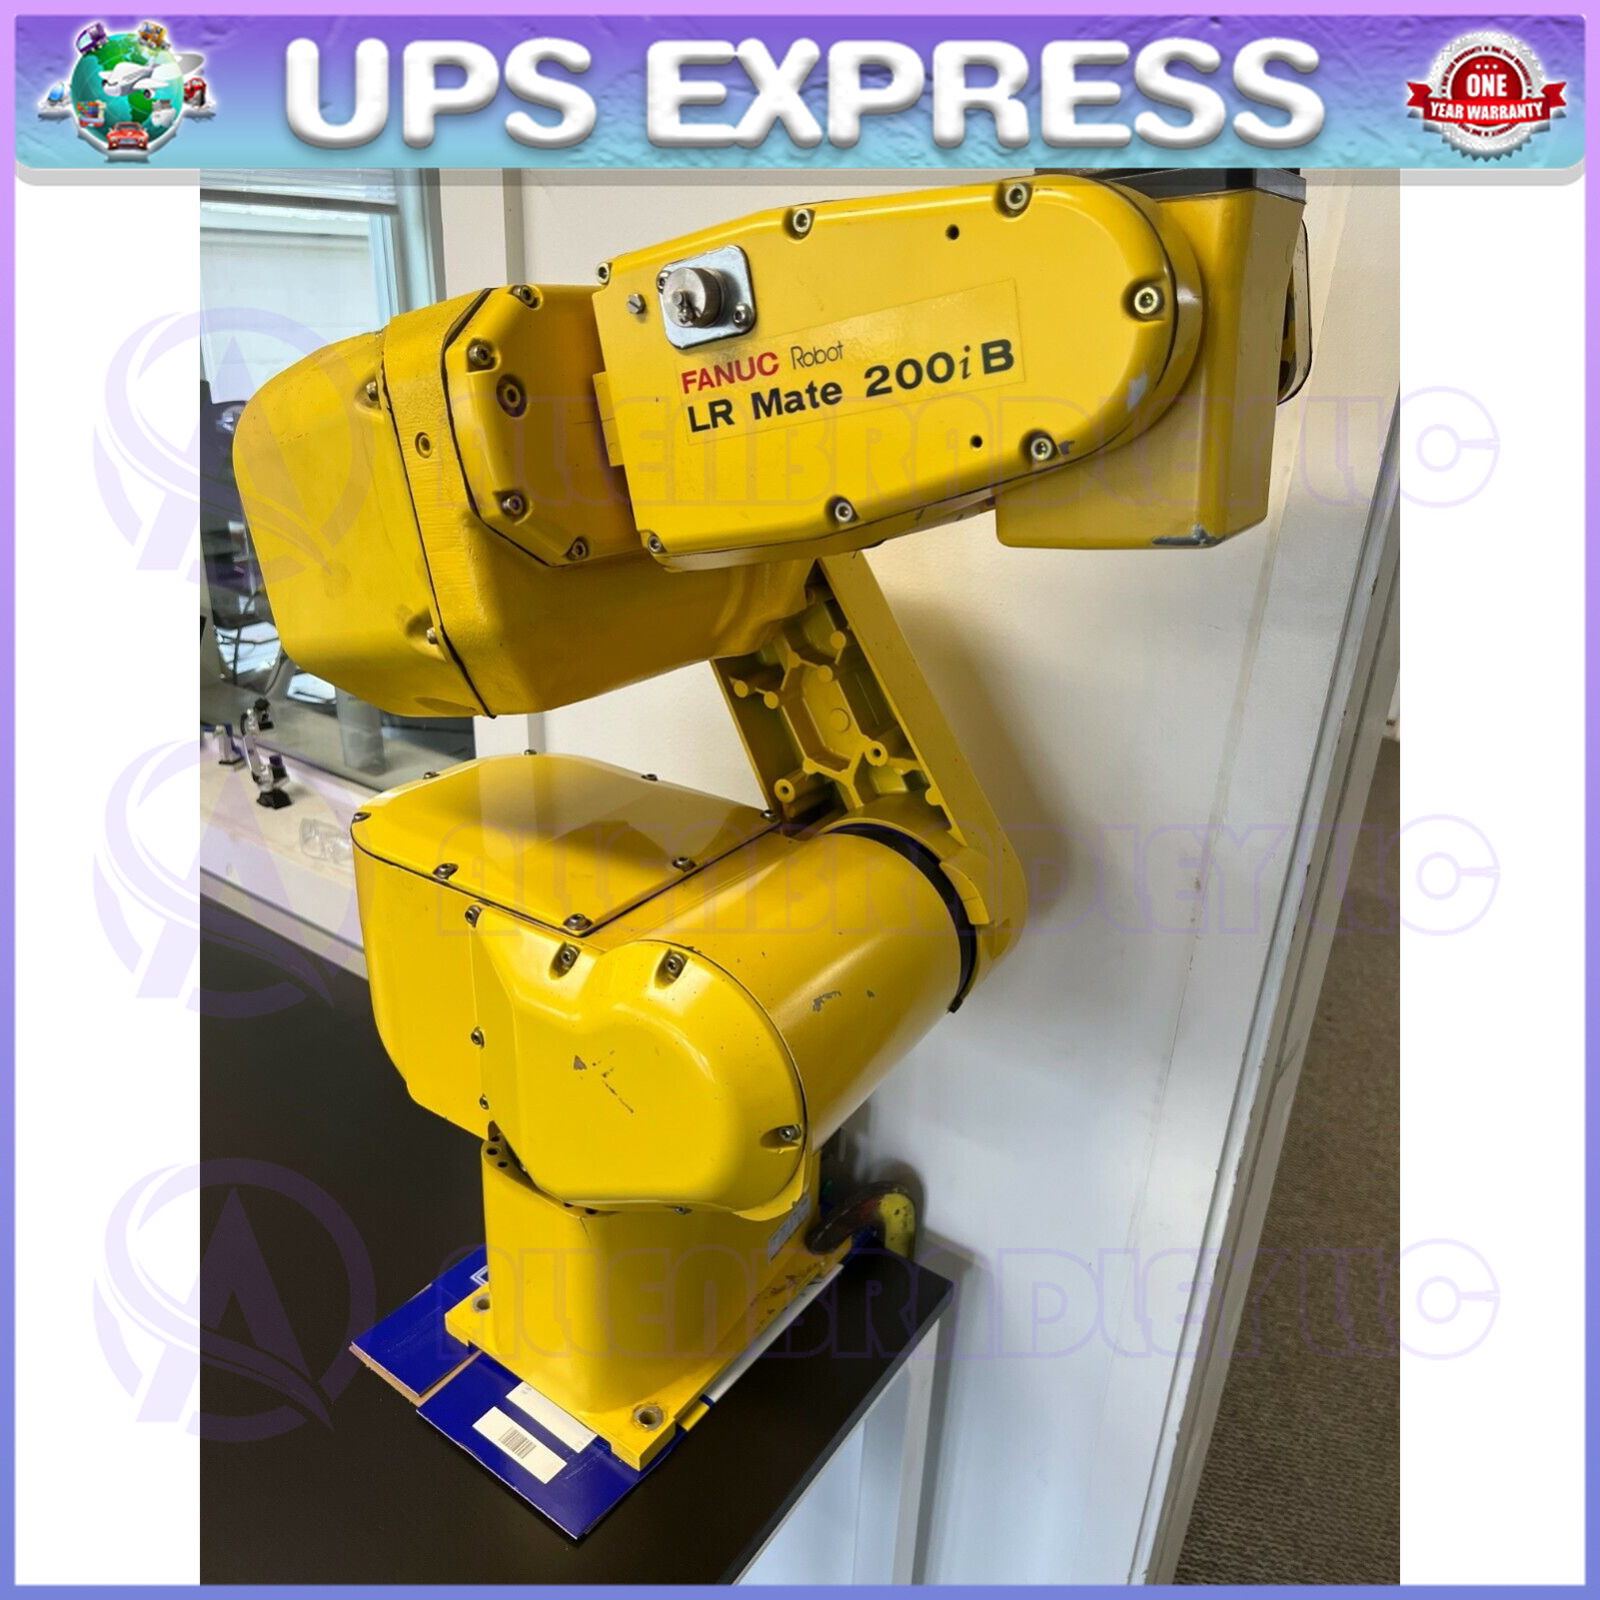 R-J3iB Fanuc Robot LR-Mate 200iB Customized Products Only As A Deposit UPS GQ